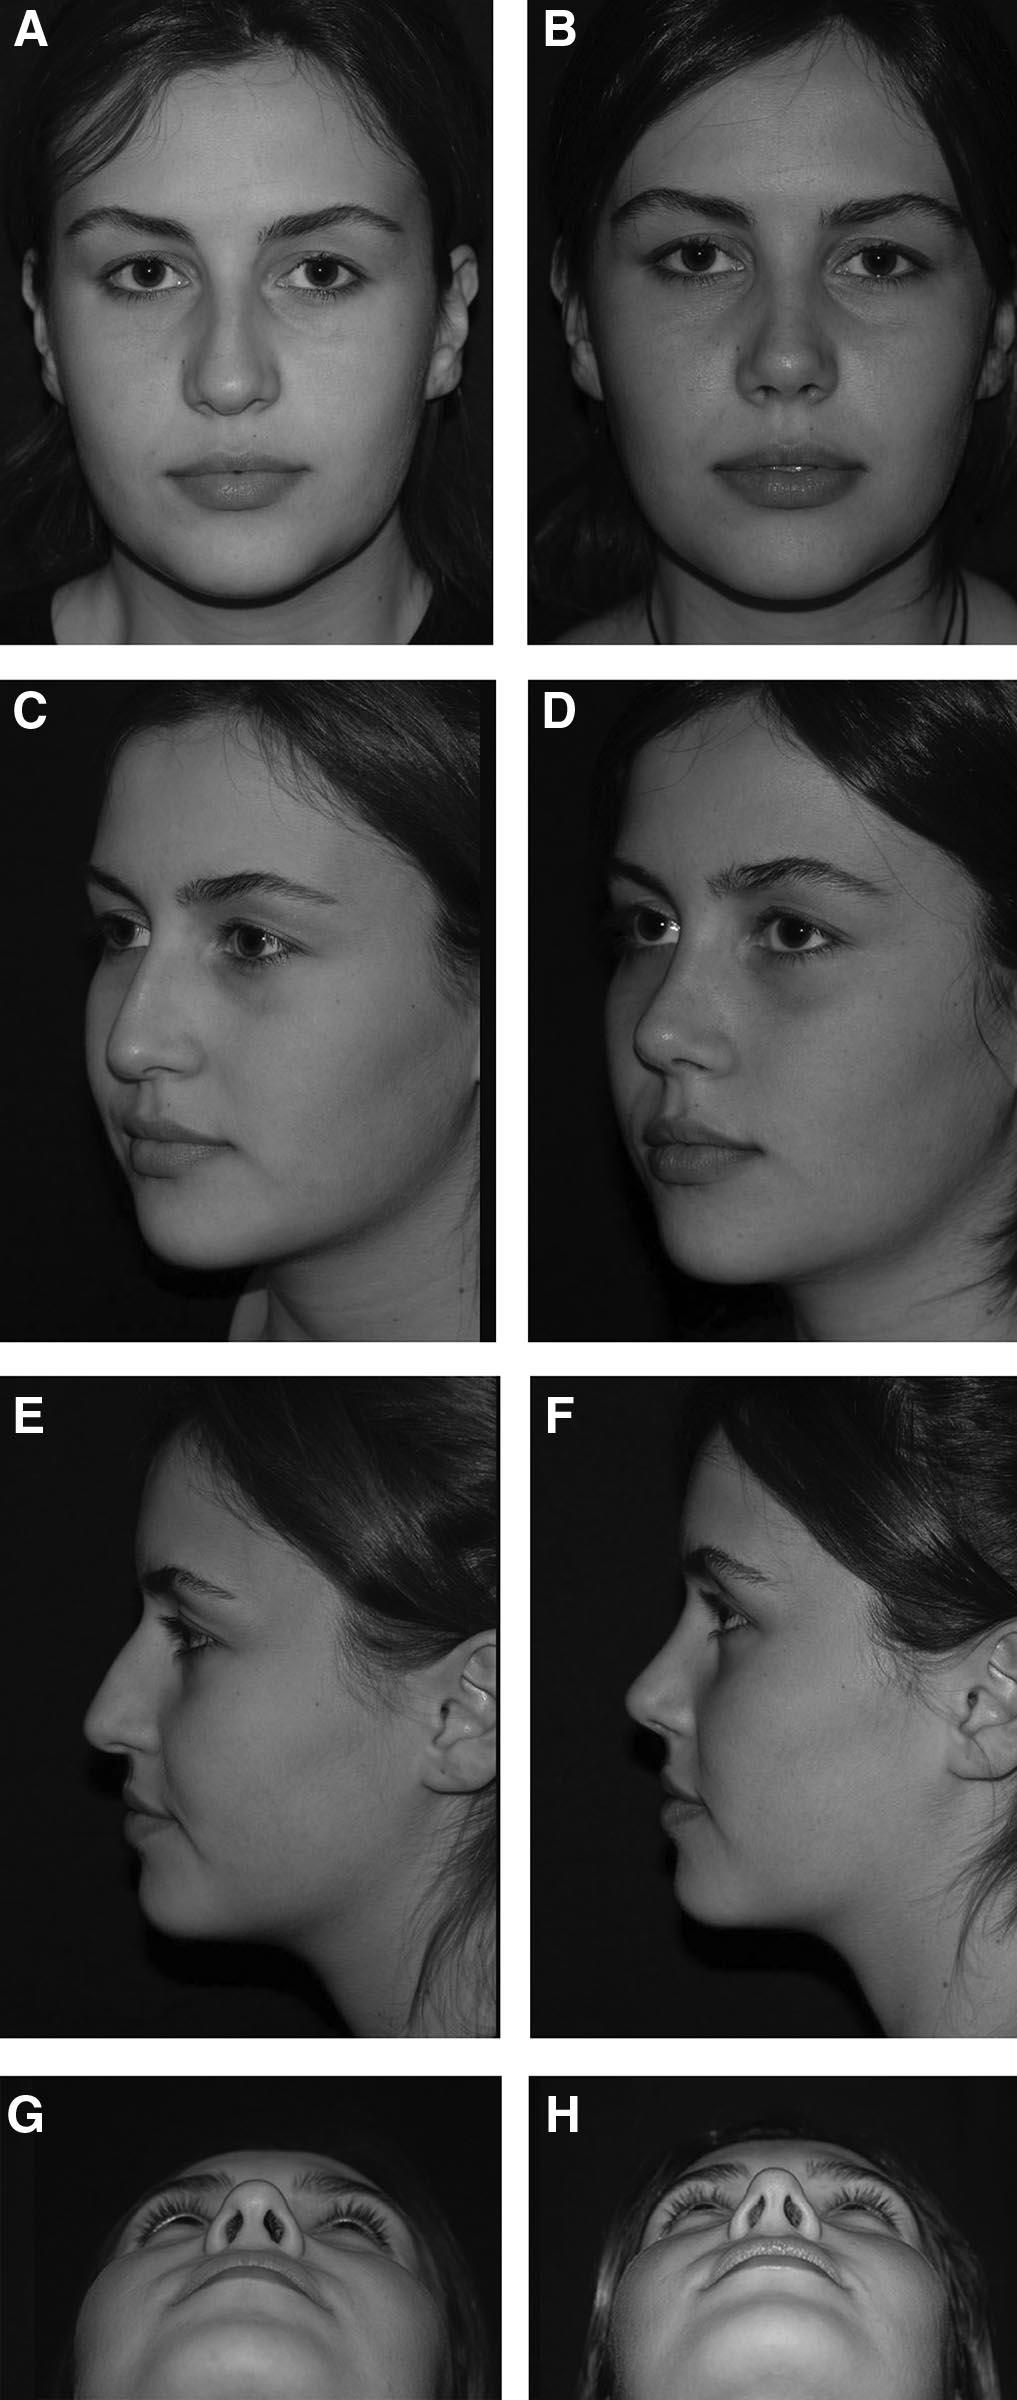 A single septocolumellar suture alone is capable of preventing these major drawbacks of closed rhinoplasty and decreases the need for open rhinoplasty in most cases, therefore limiting the dissection